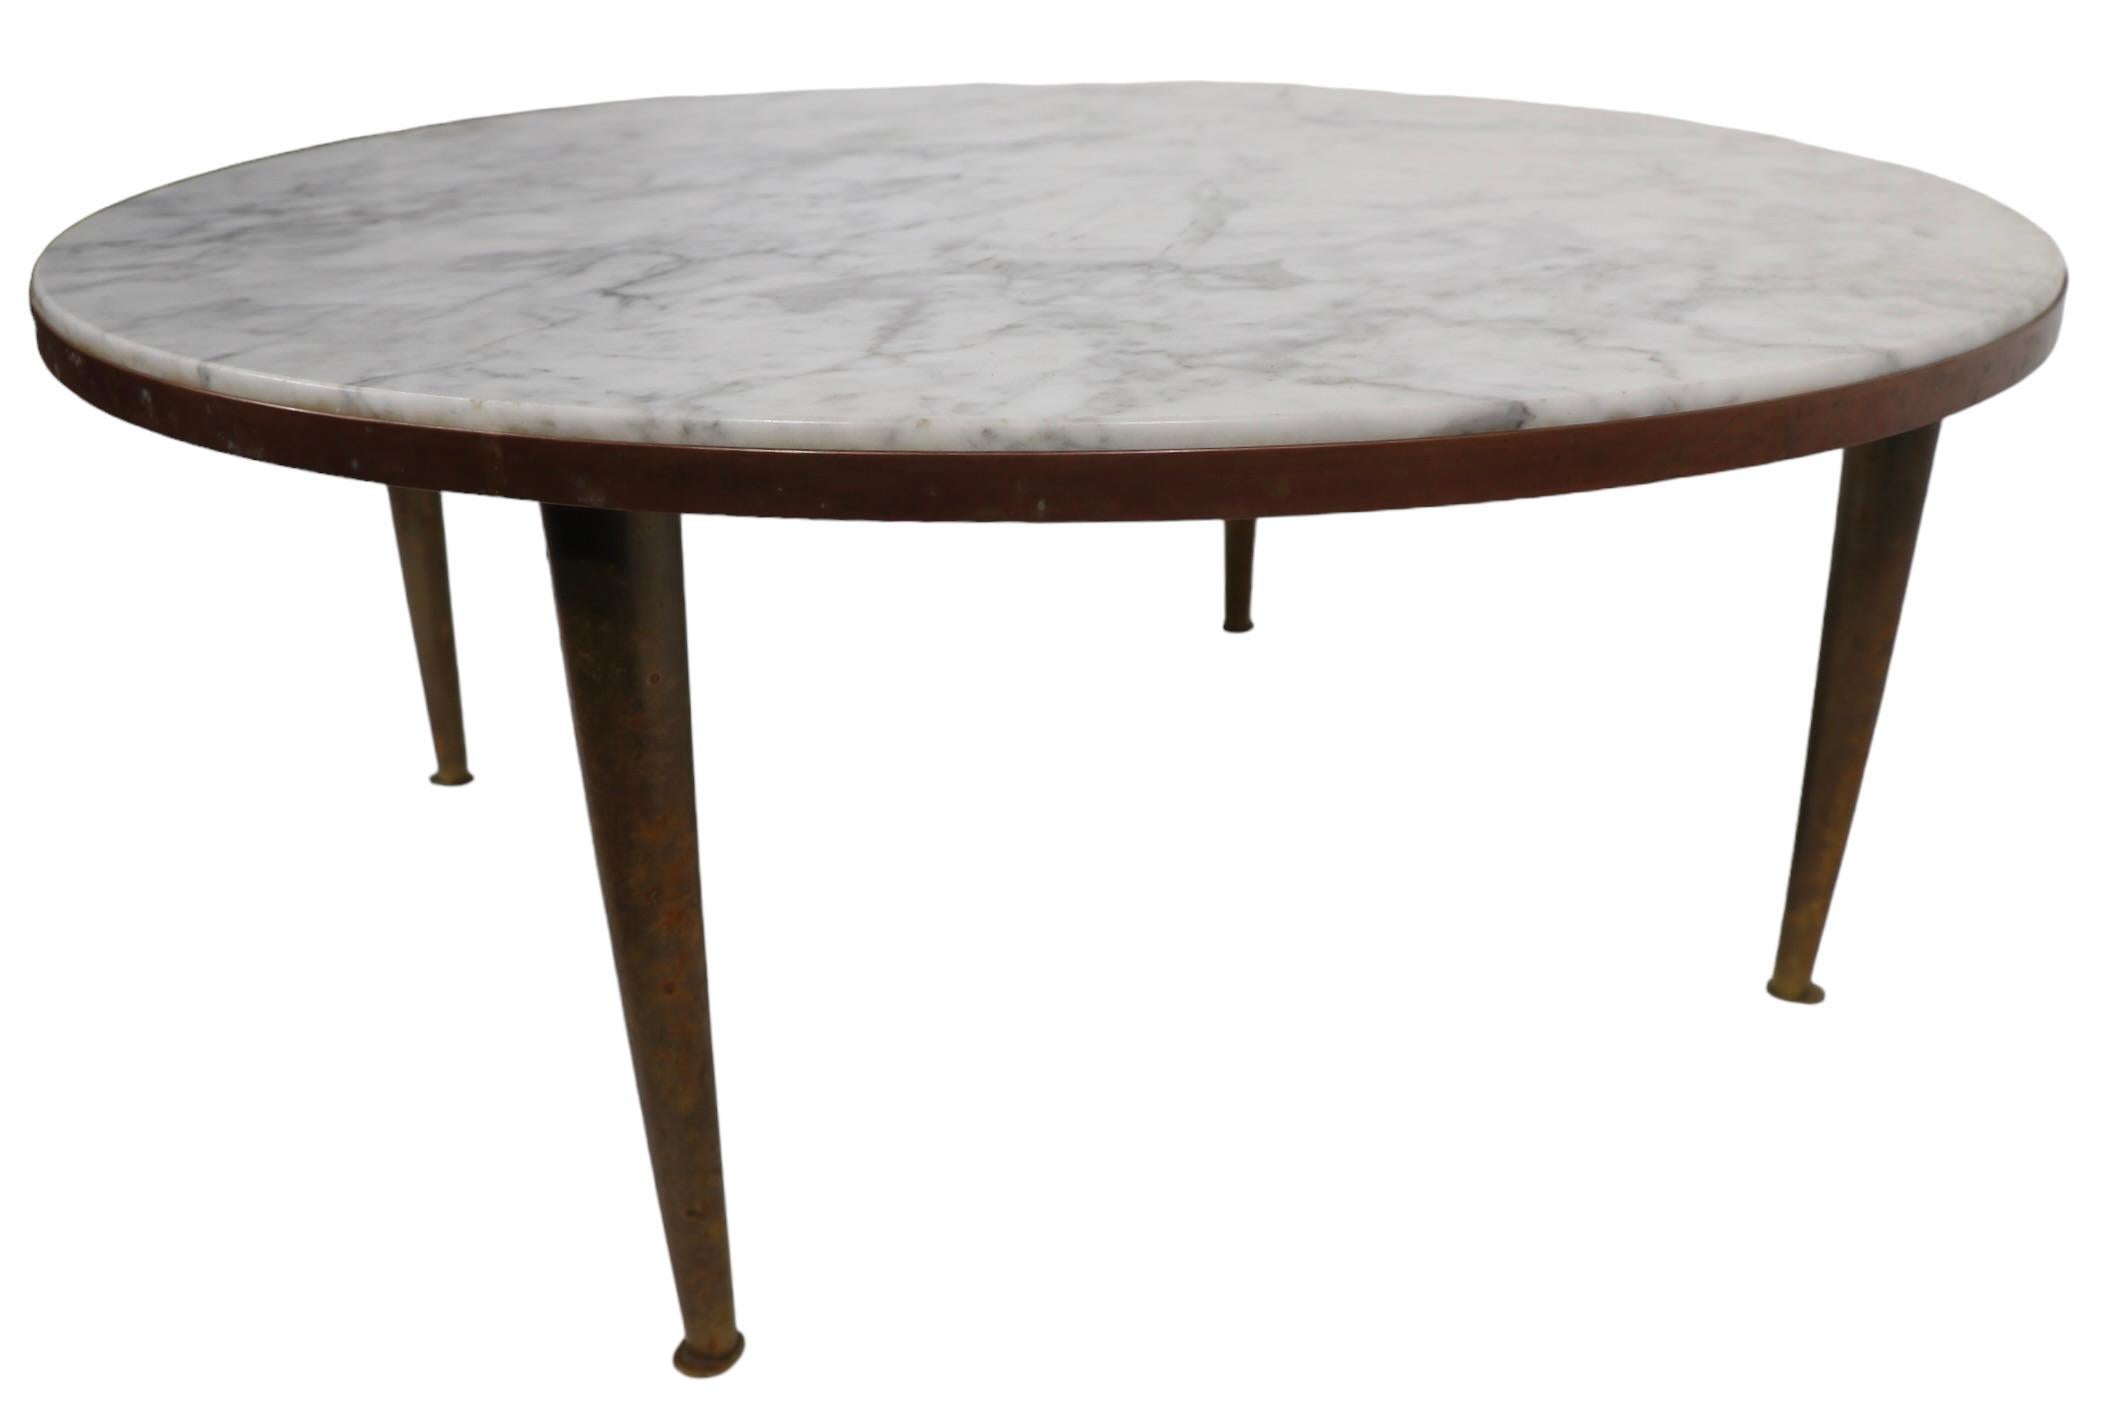   Round Italian Mid Century Marble Top Coffee Table w/ Brass  Tapered Pole Legs 7